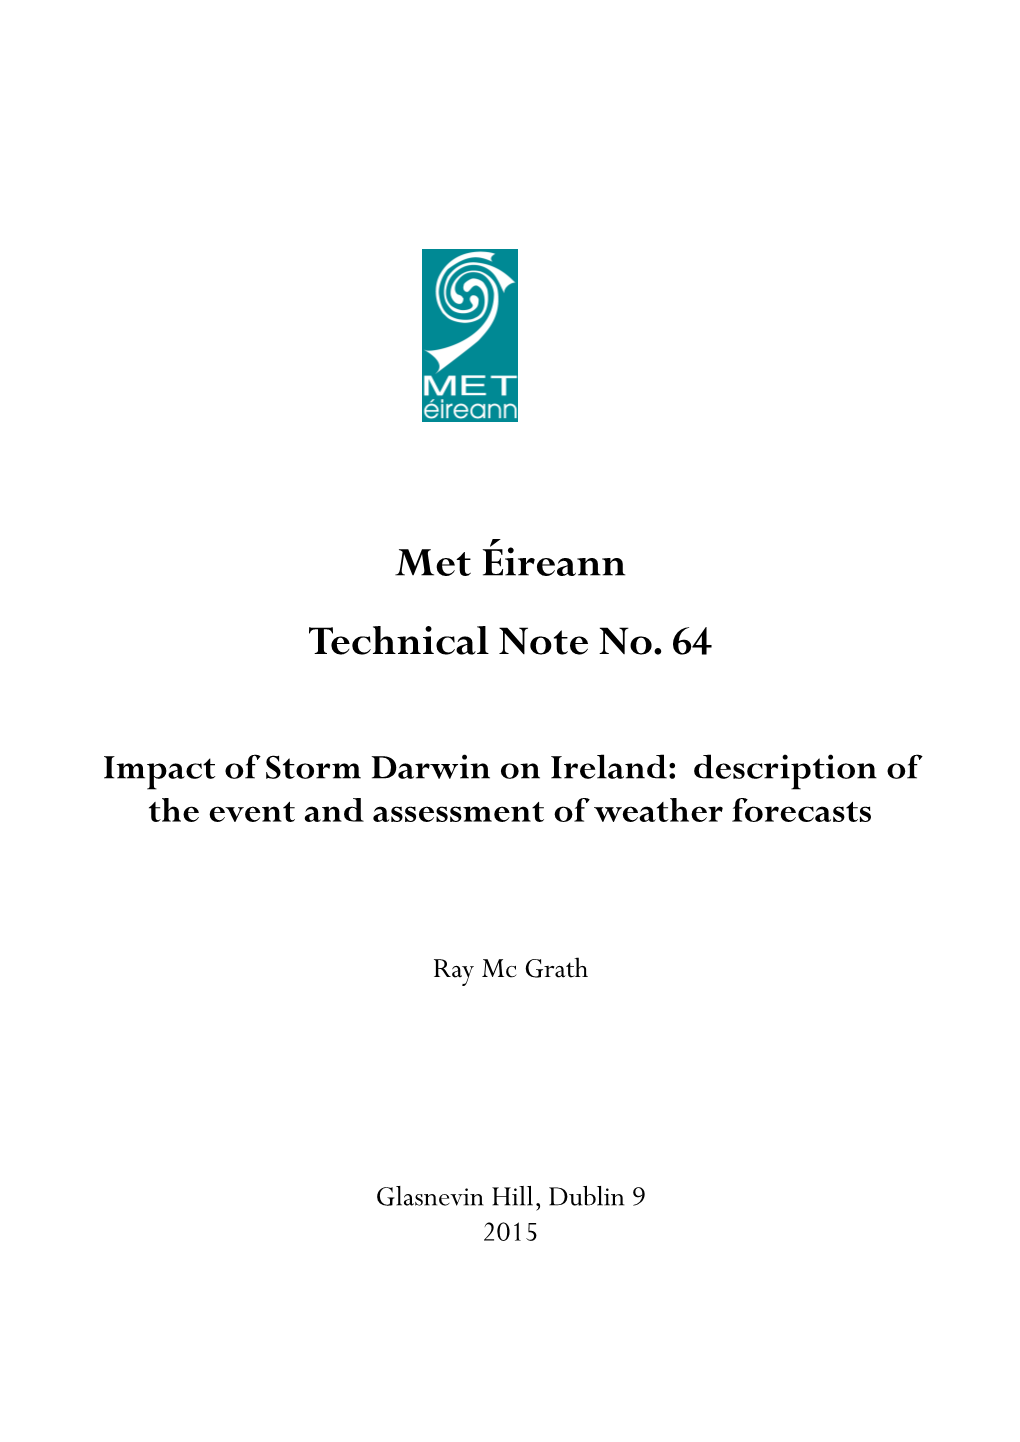 Impact of Storm Darwin on Ireland: Description of the Event and Assessment of Weather Forecasts